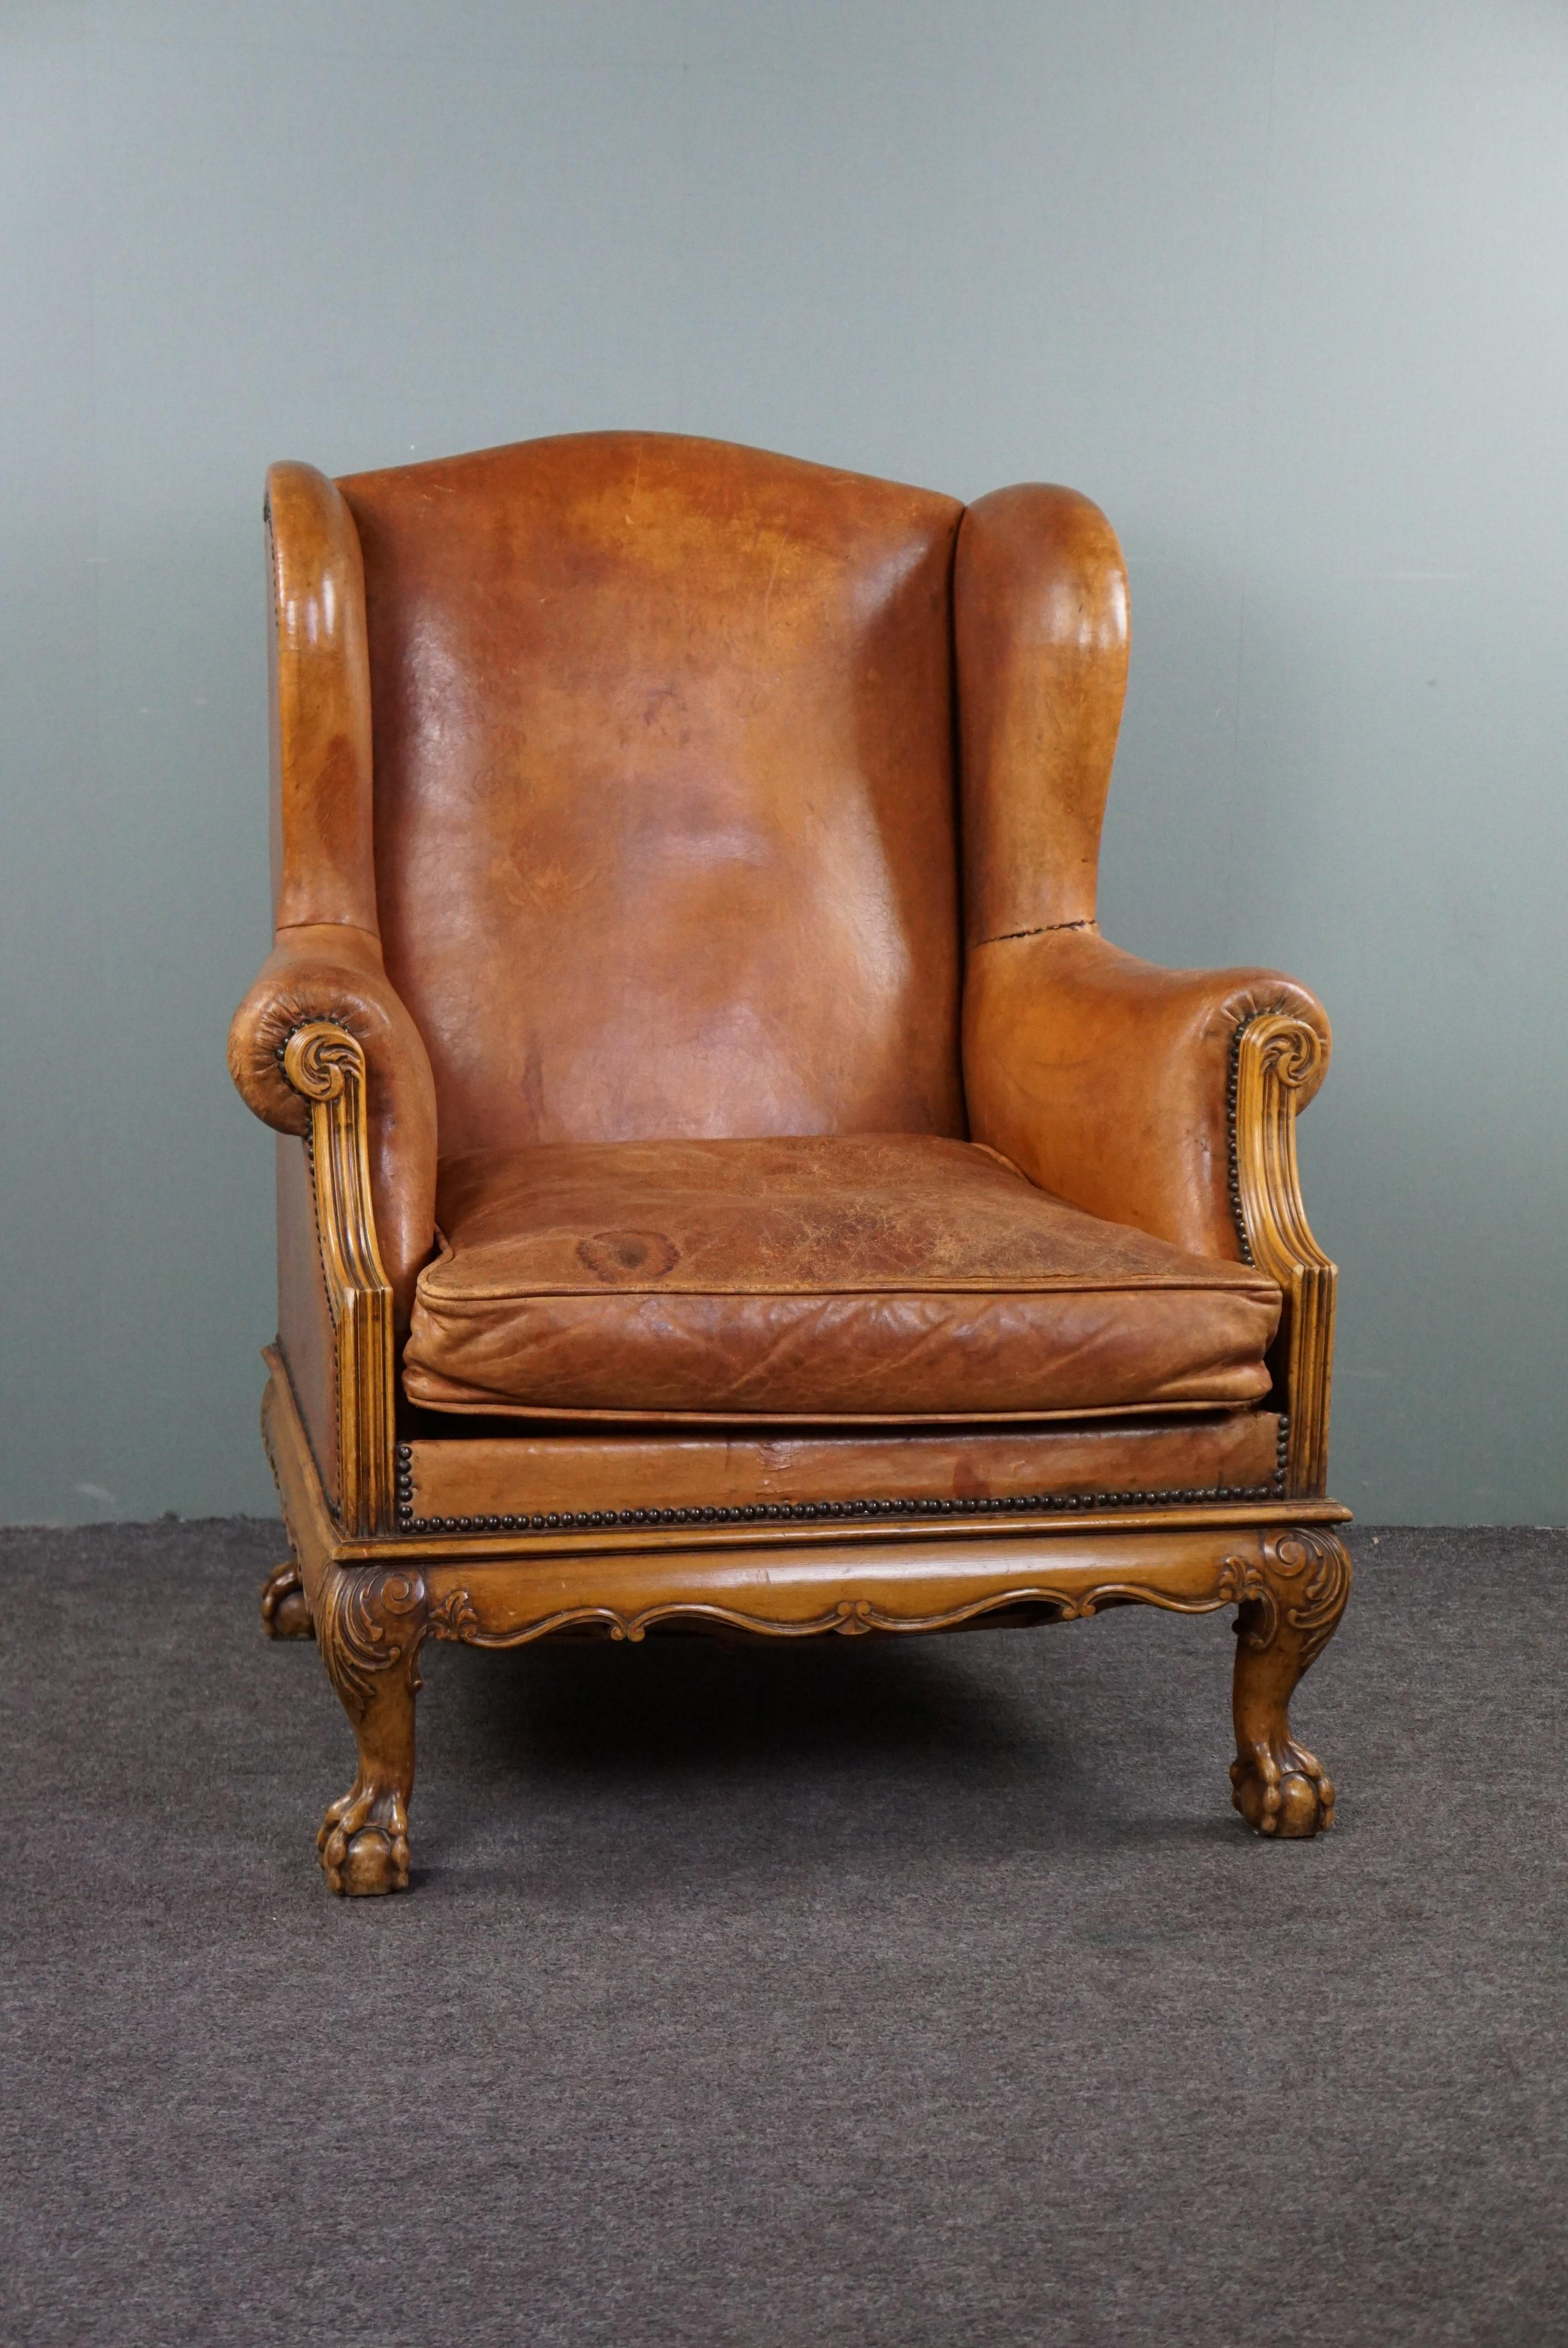 With pleasure, we offer you this characteristic sheep leather wing chair with graceful legs.

This sheep leather wing chair is set on a vividly decorated wooden base with beautifully carved claw feet. This chair not only provides character and